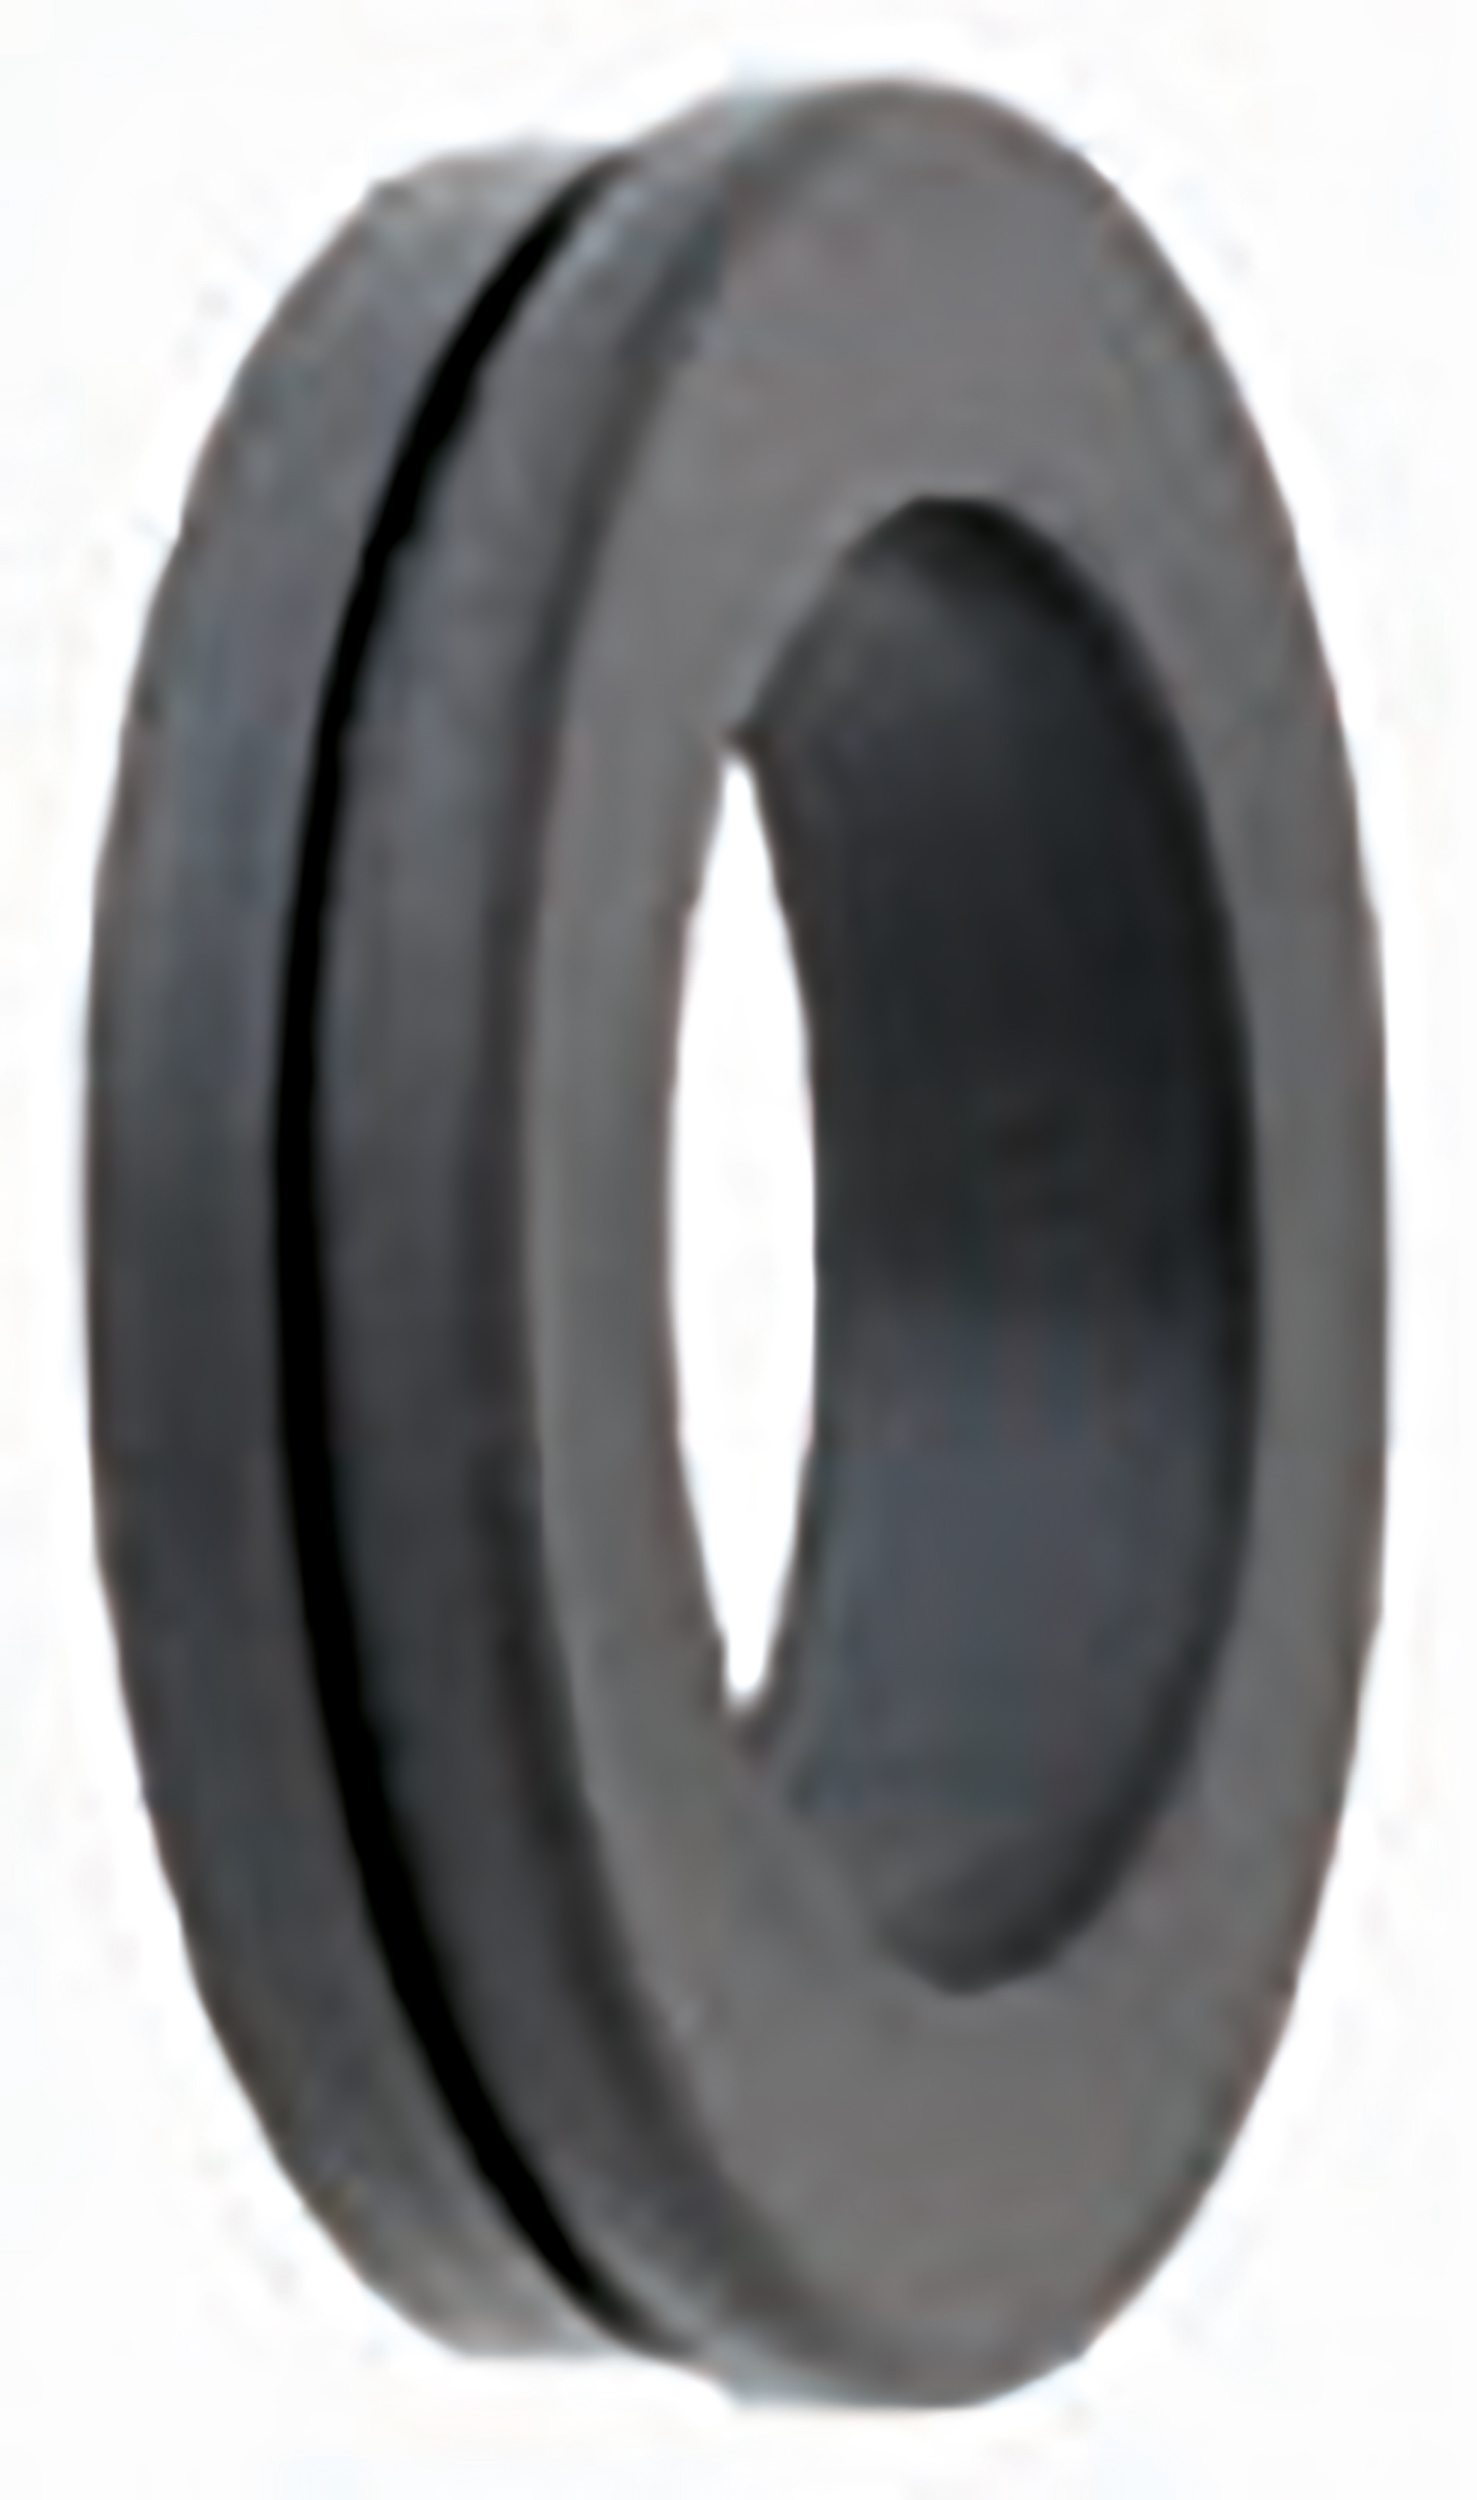 Molded sealing ring SH (suction and high pressure), material: NBR, black, temperature range from -30 °C up to +100 °C